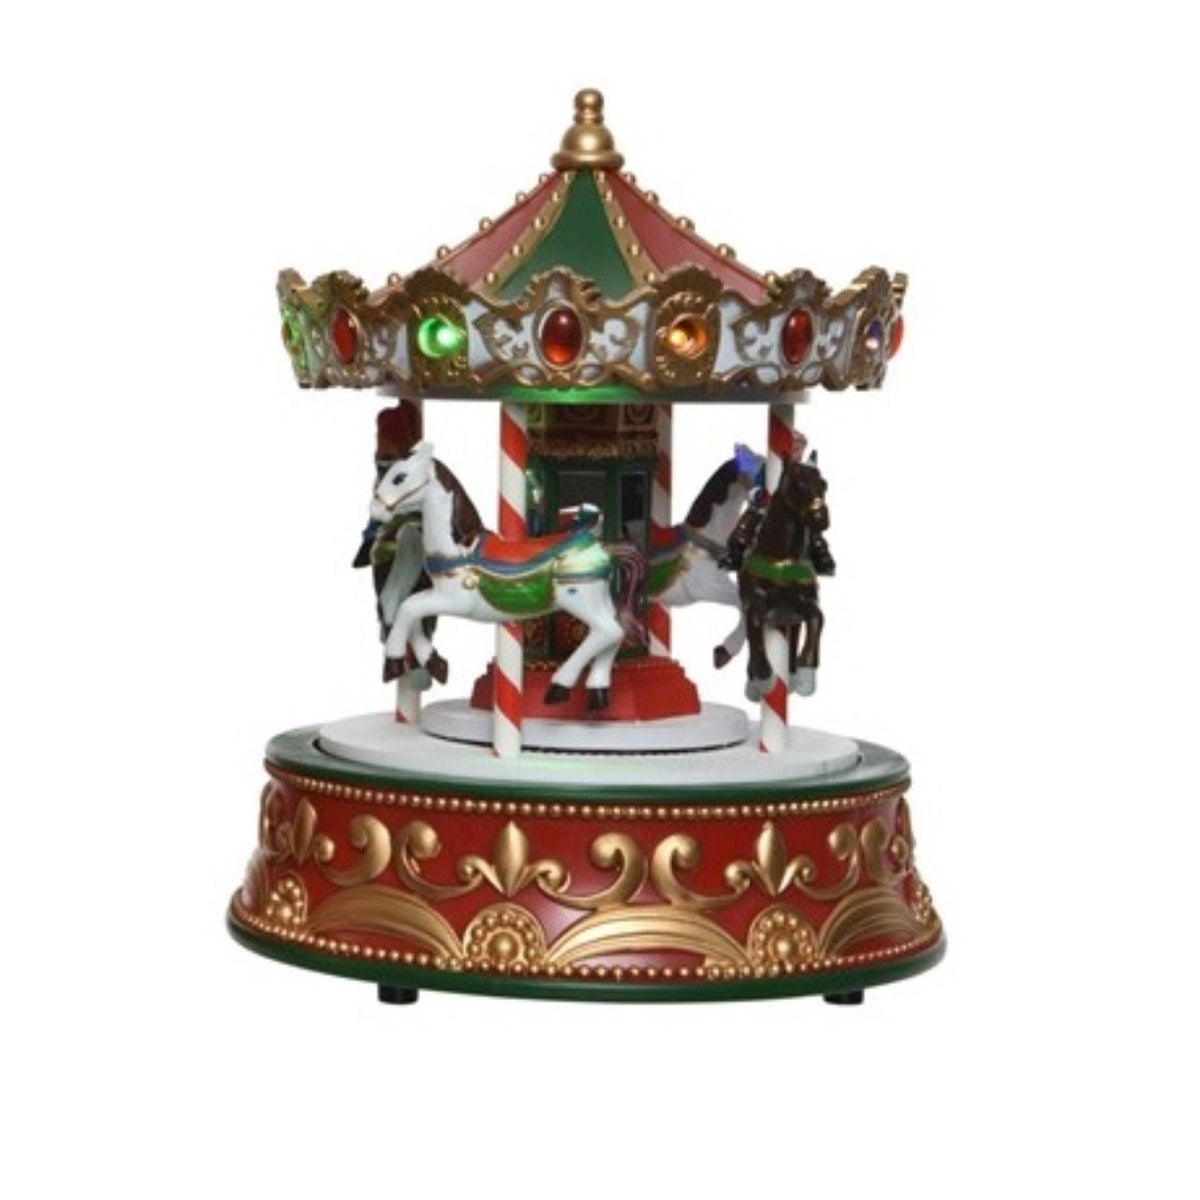 Green and Red Animated Christmas Carousel